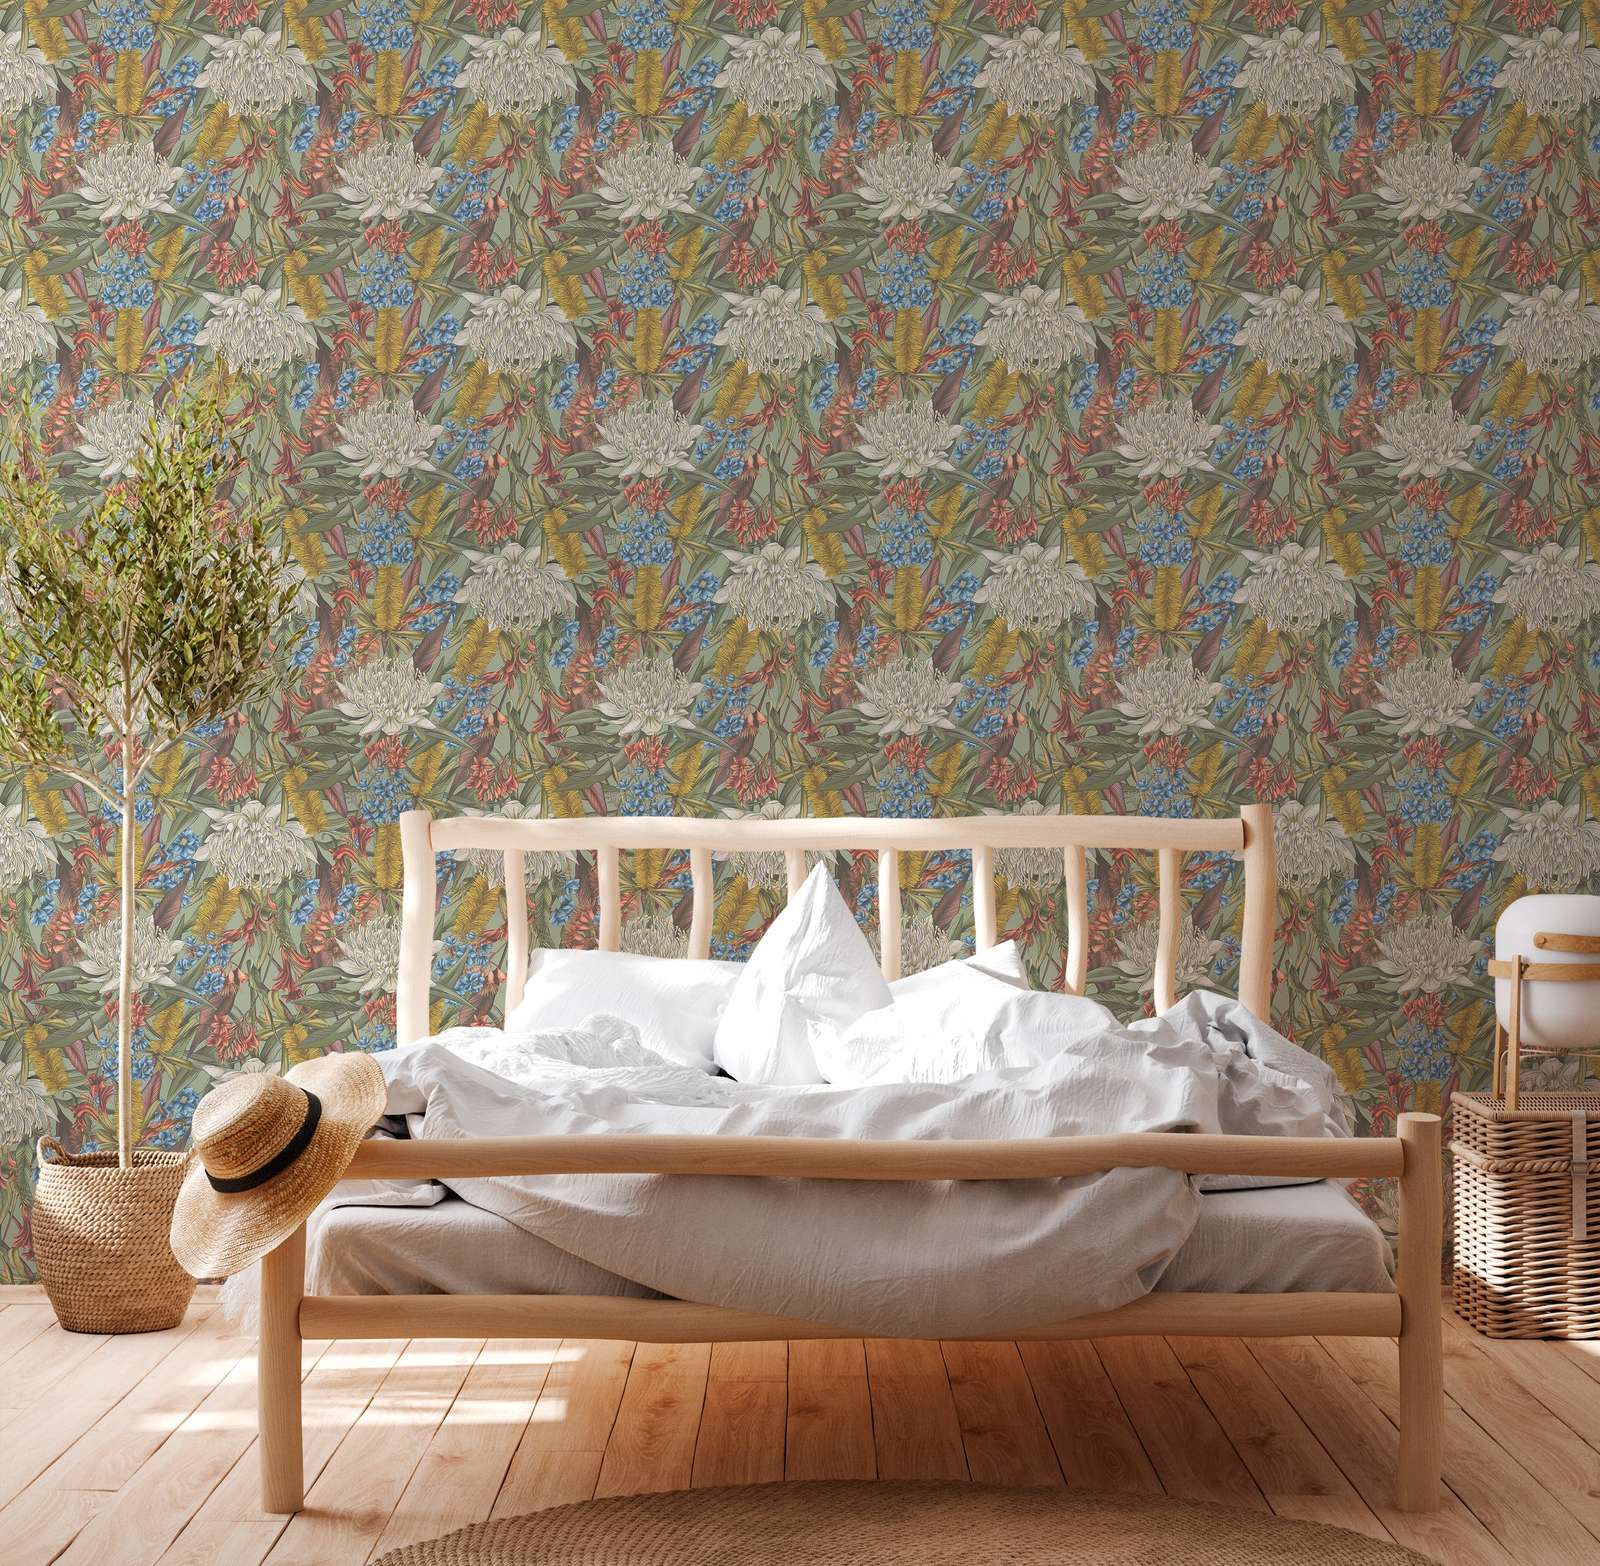             Floral wallpaper in jungle style with leaves & flowers textured matt - multicoloured, green, yellow
        